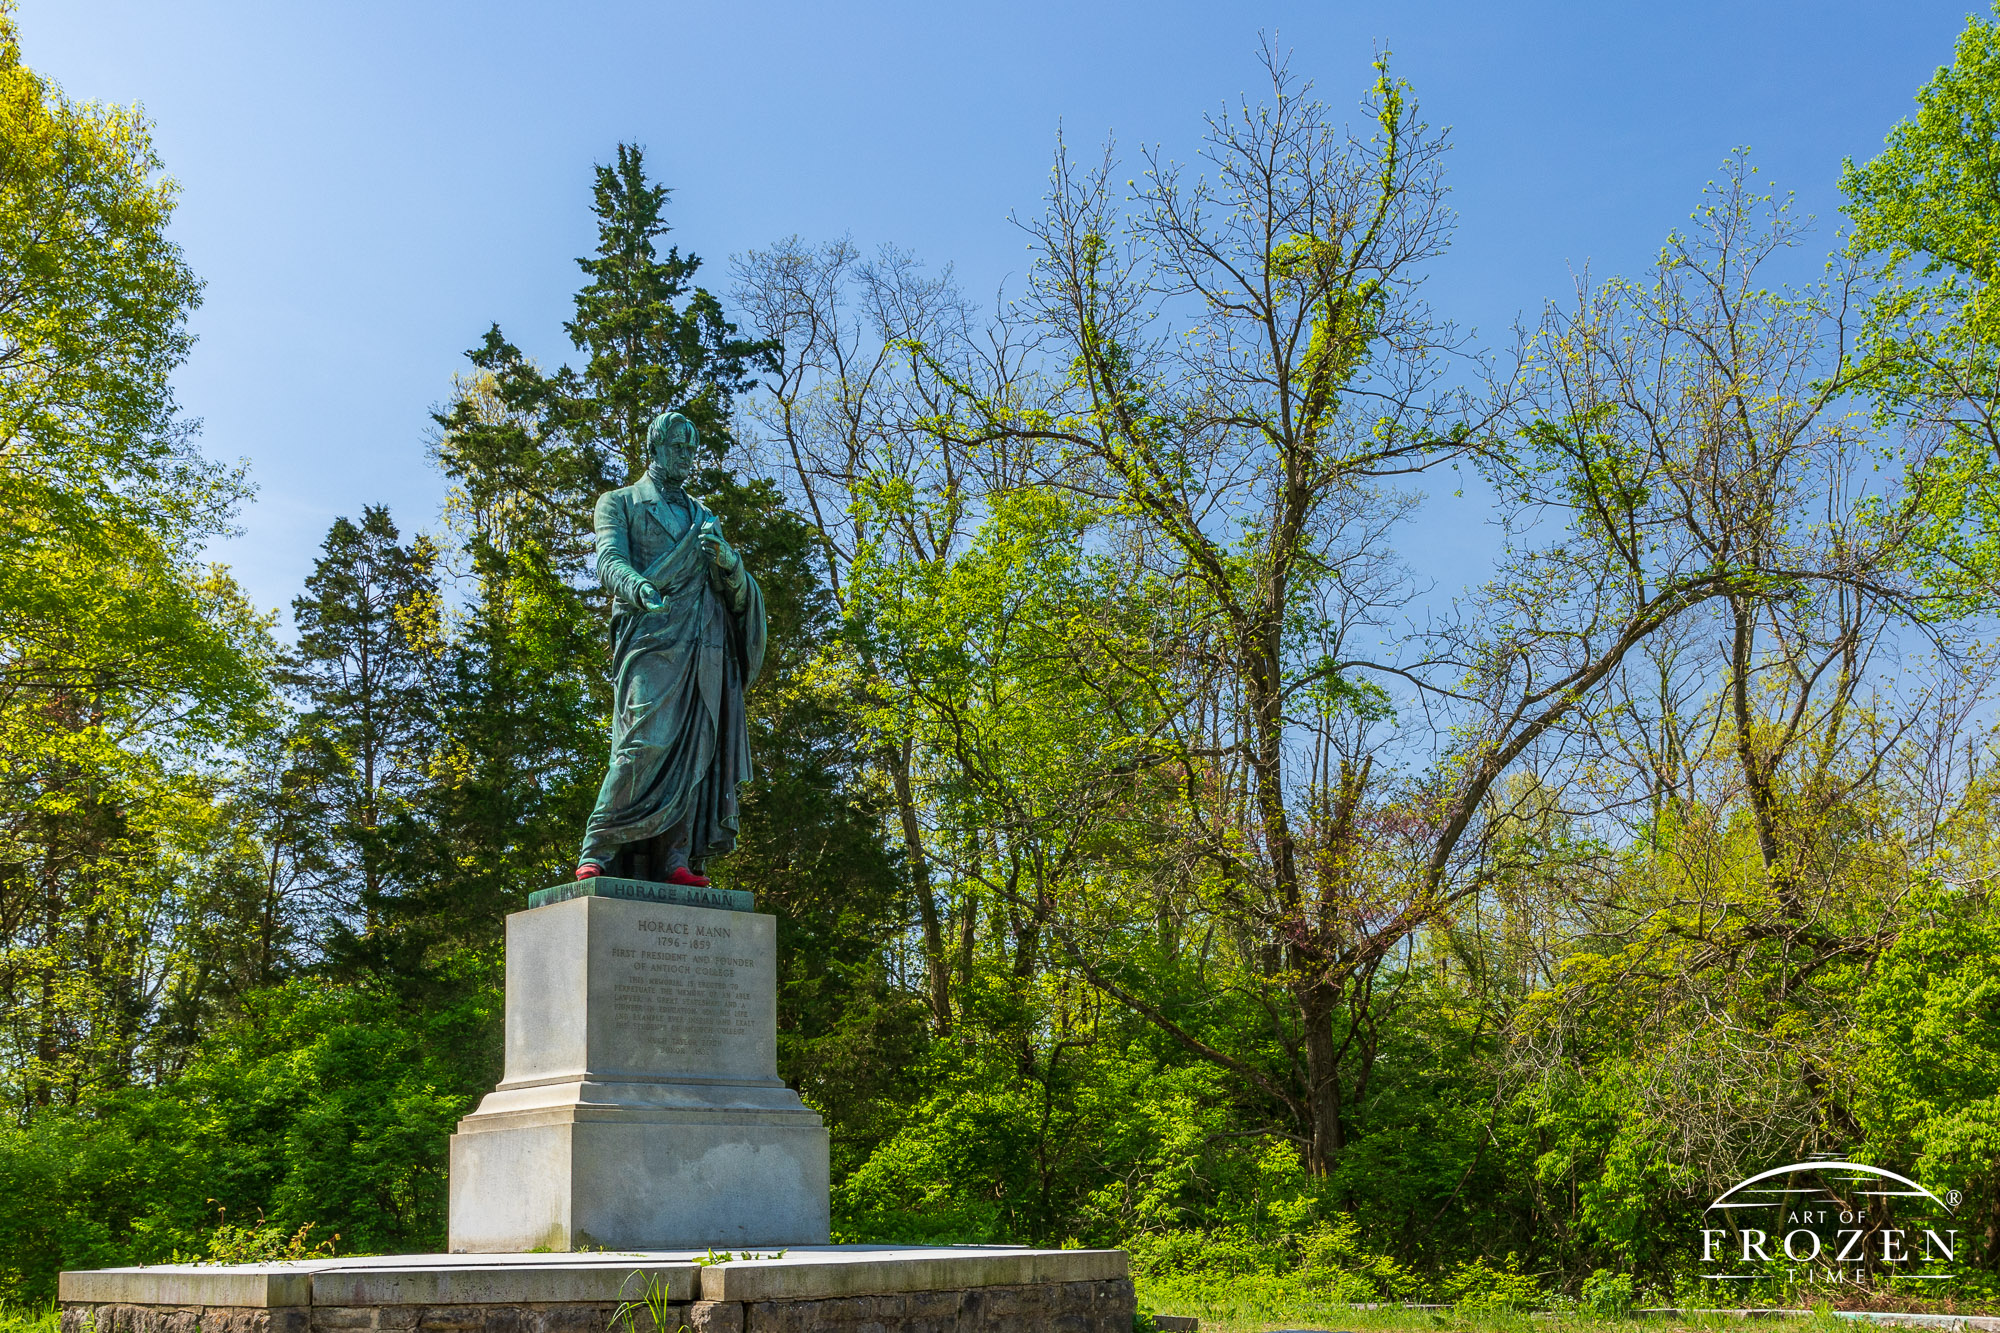 As spring trees leaf out in Glen Helen Nature Preserve a Horace Mann sculptures bask in the sun under blue skies